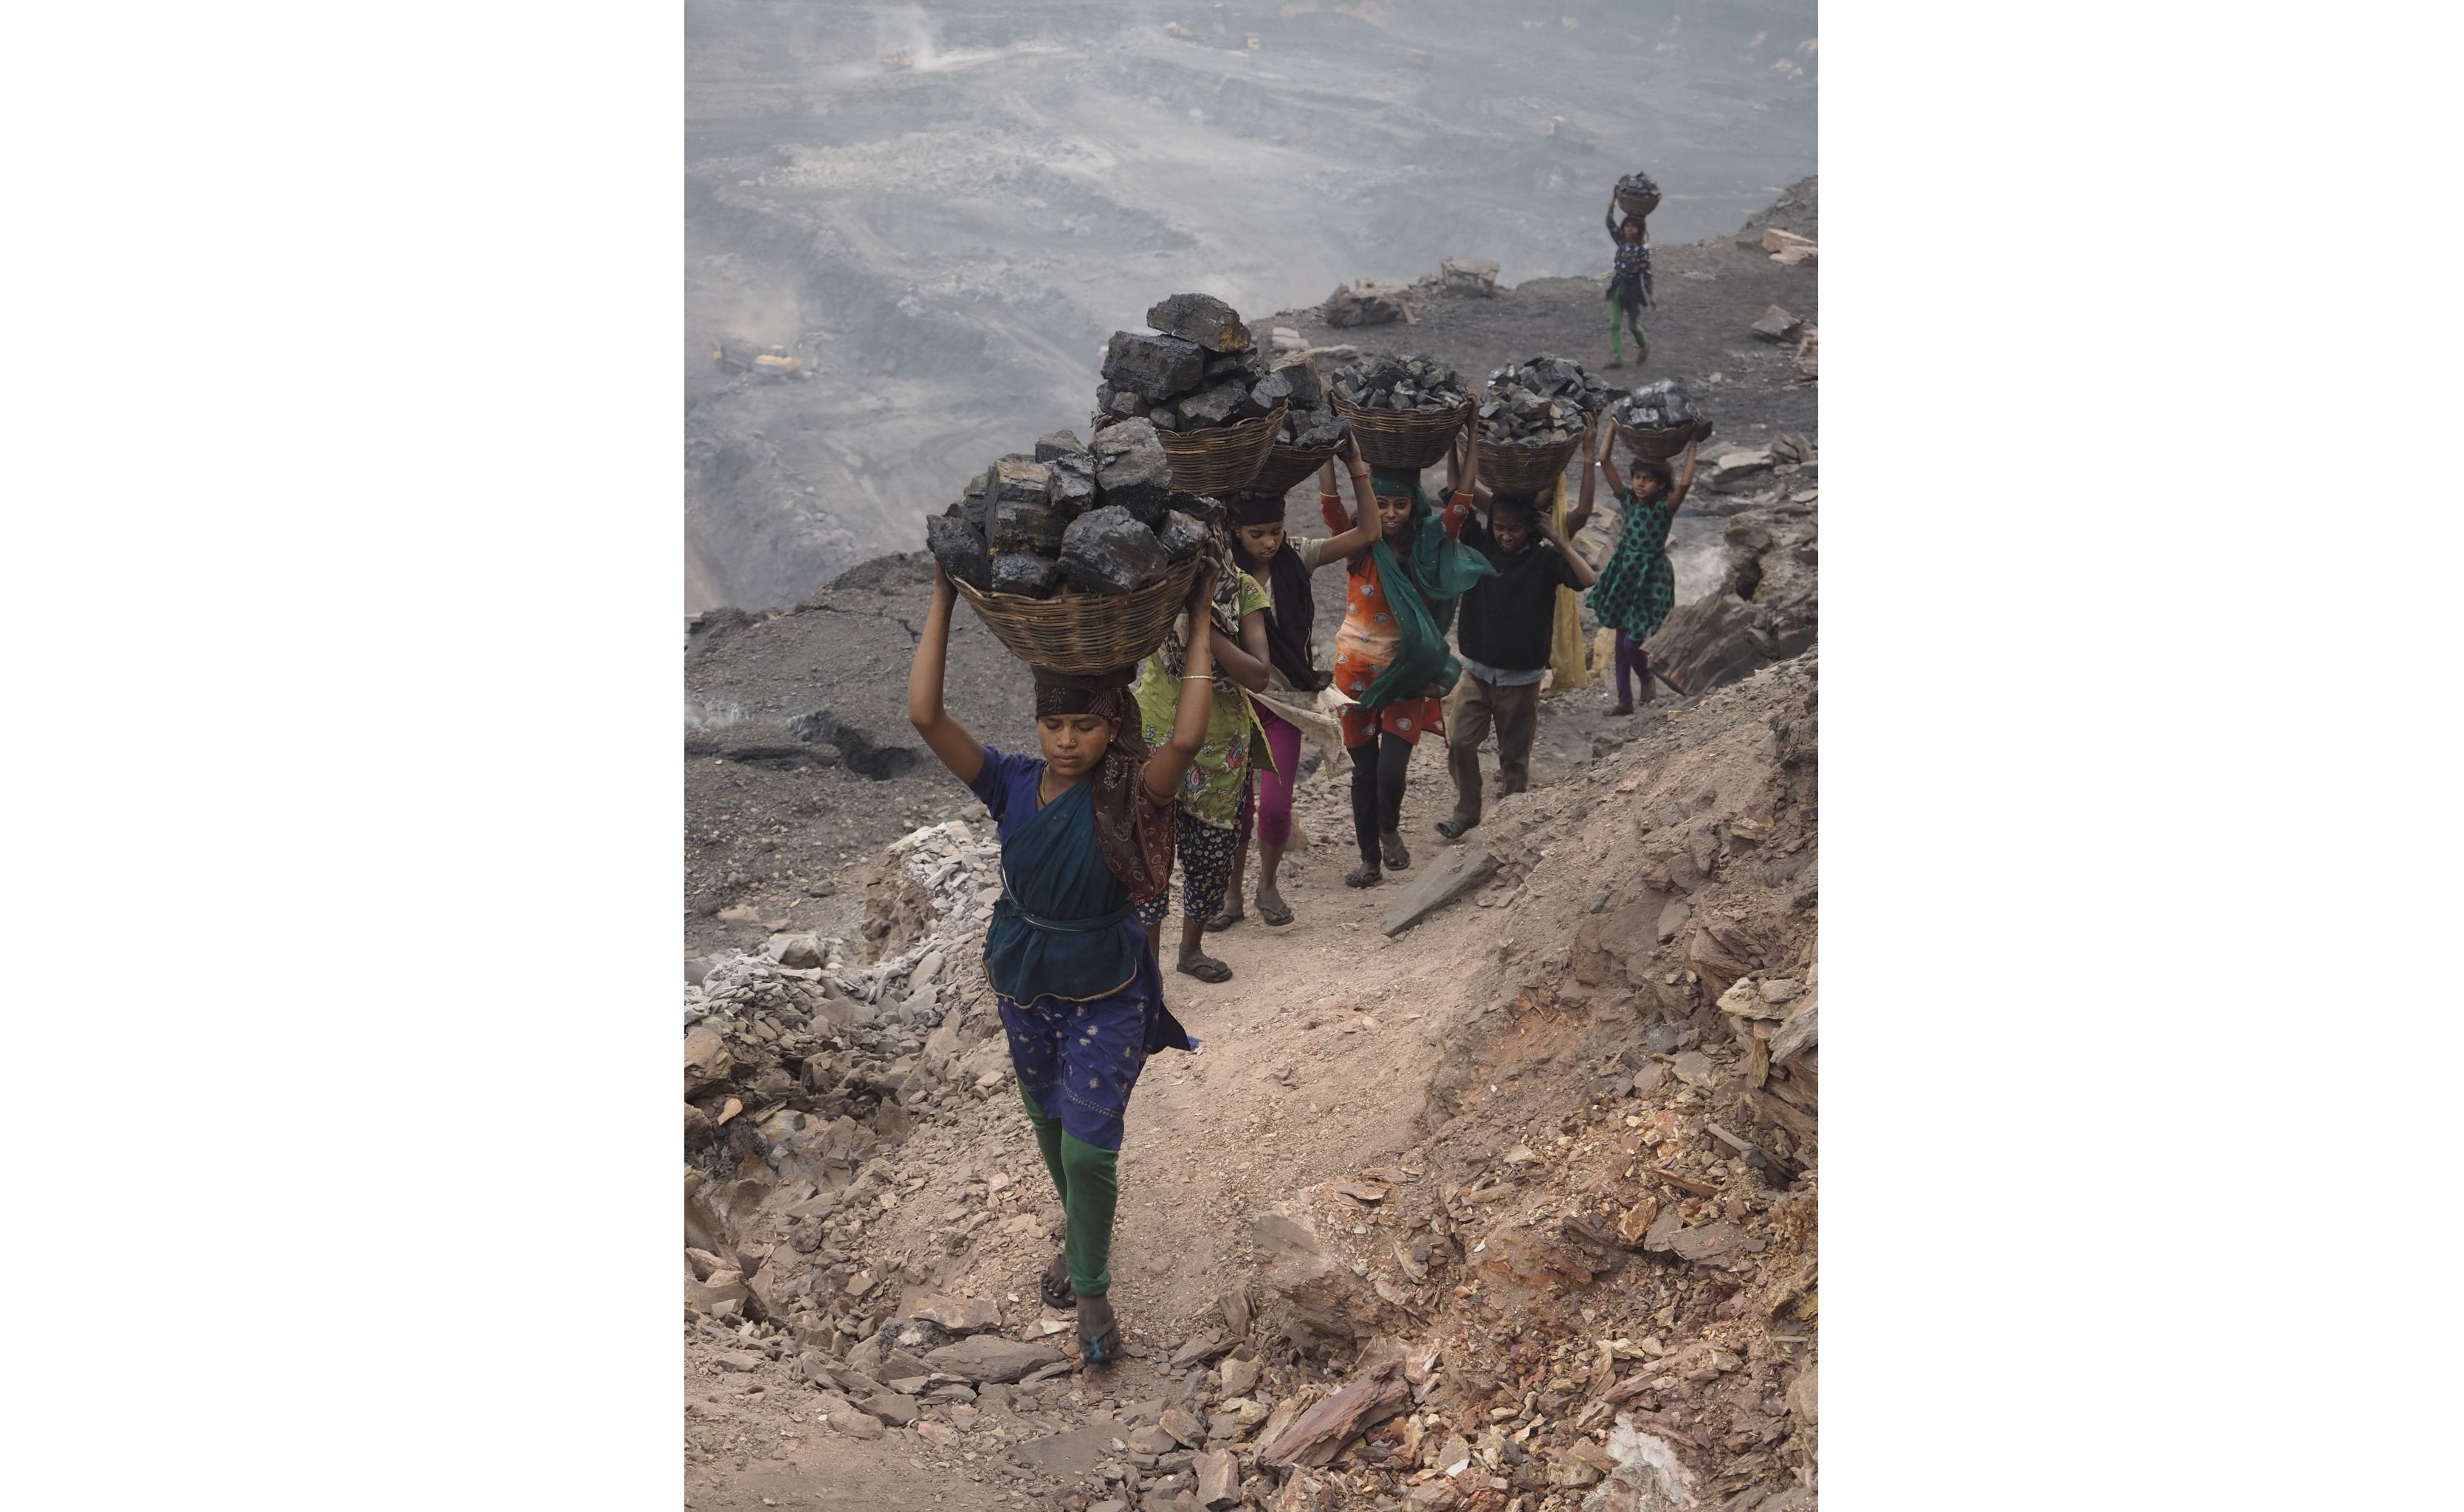 Women and young girls carry scavenged coal from the bottom of the Alkusha Coalfield. Image by Larry C. Price. India, 2016.